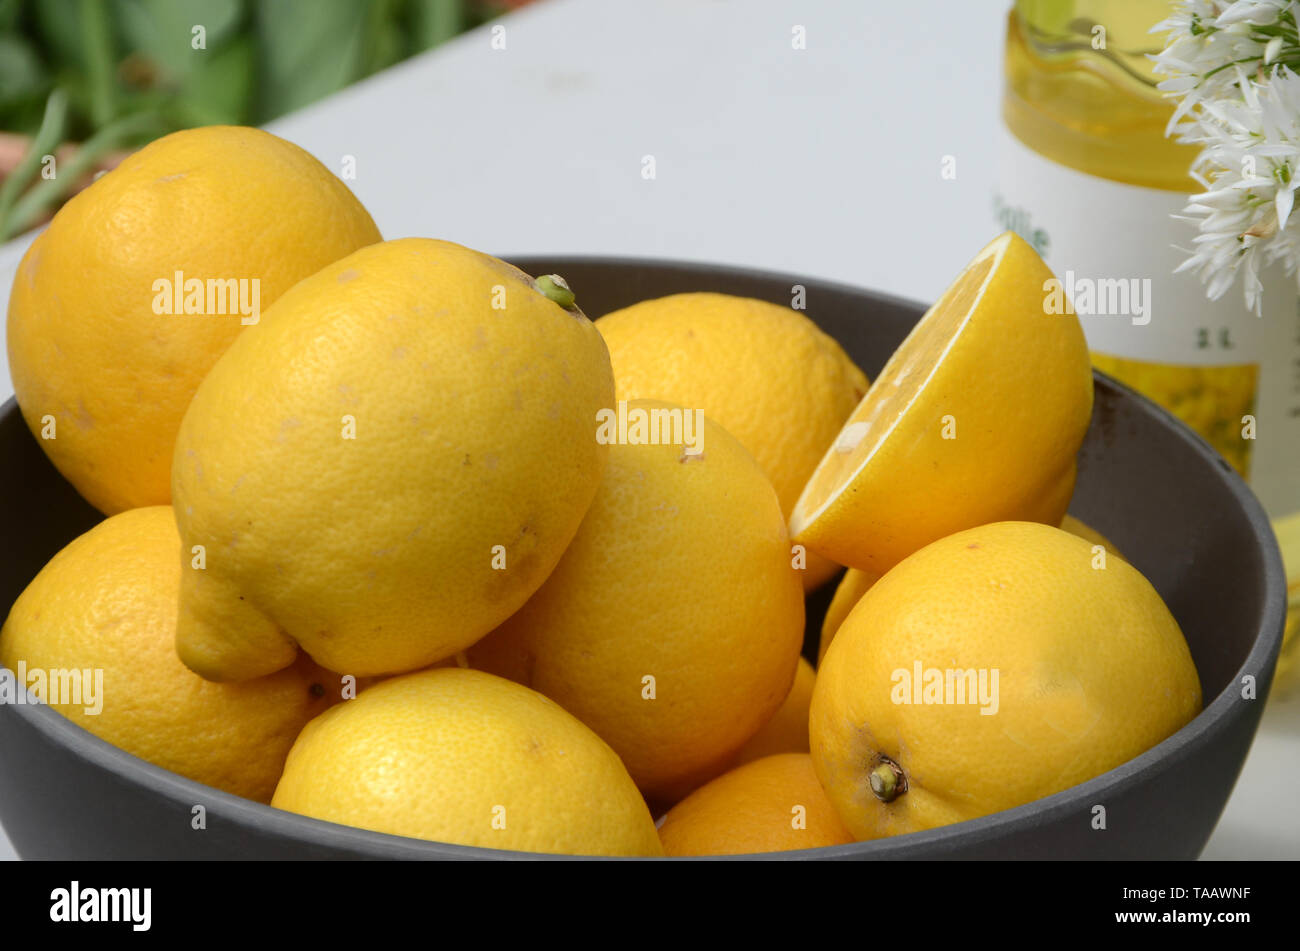 Closeup on bowl with yellow lemons in a table arrangement. Stock Photo